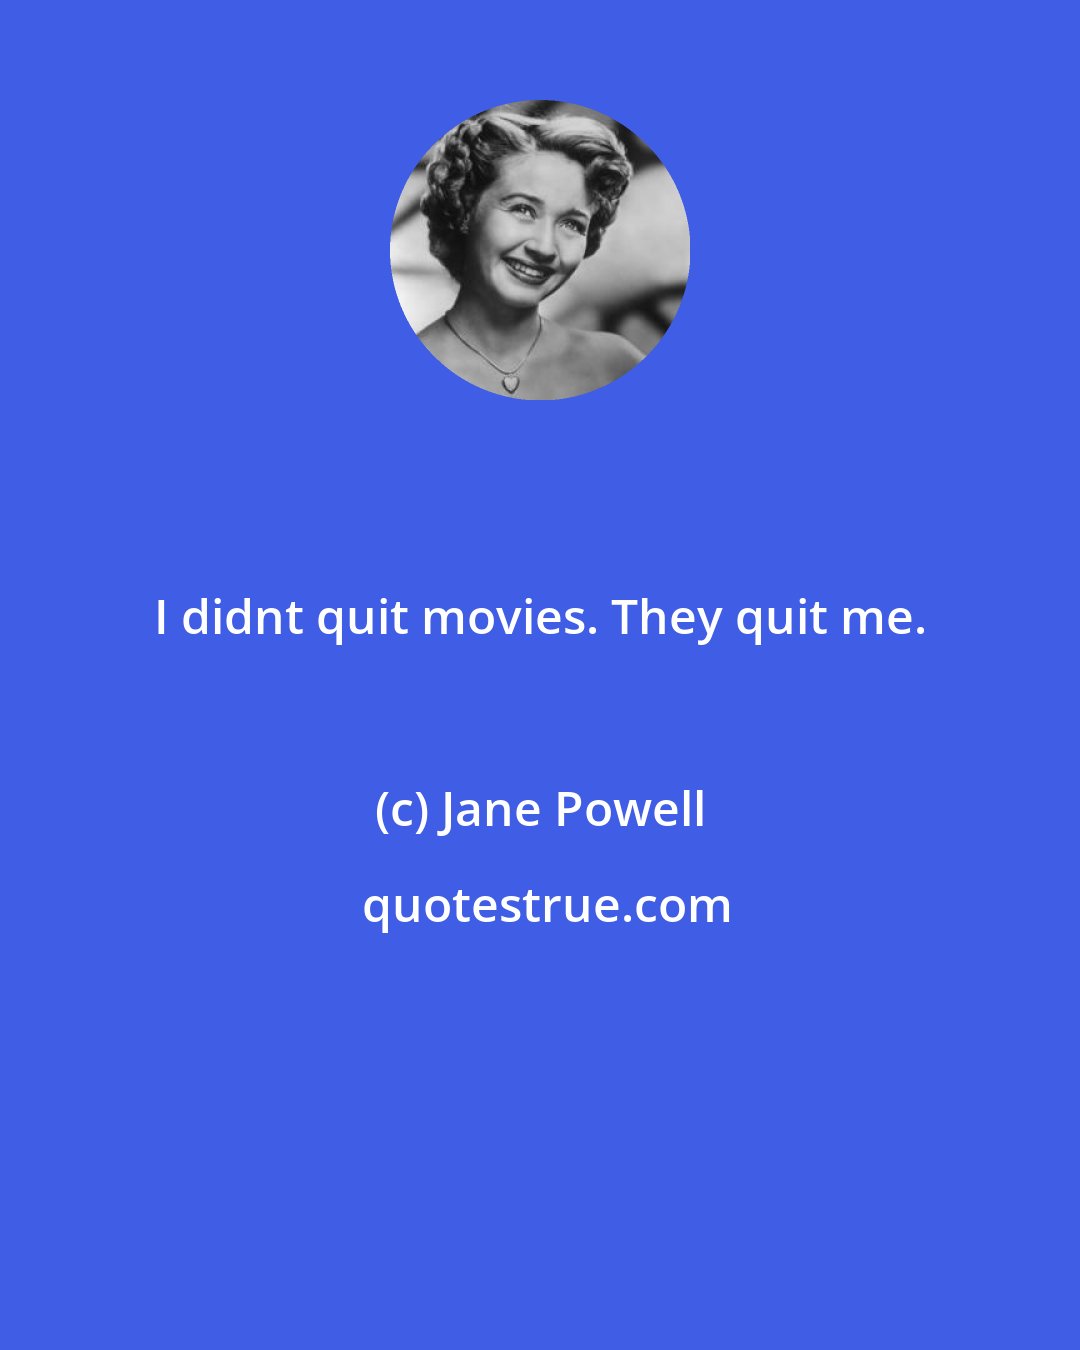 Jane Powell: I didnt quit movies. They quit me.